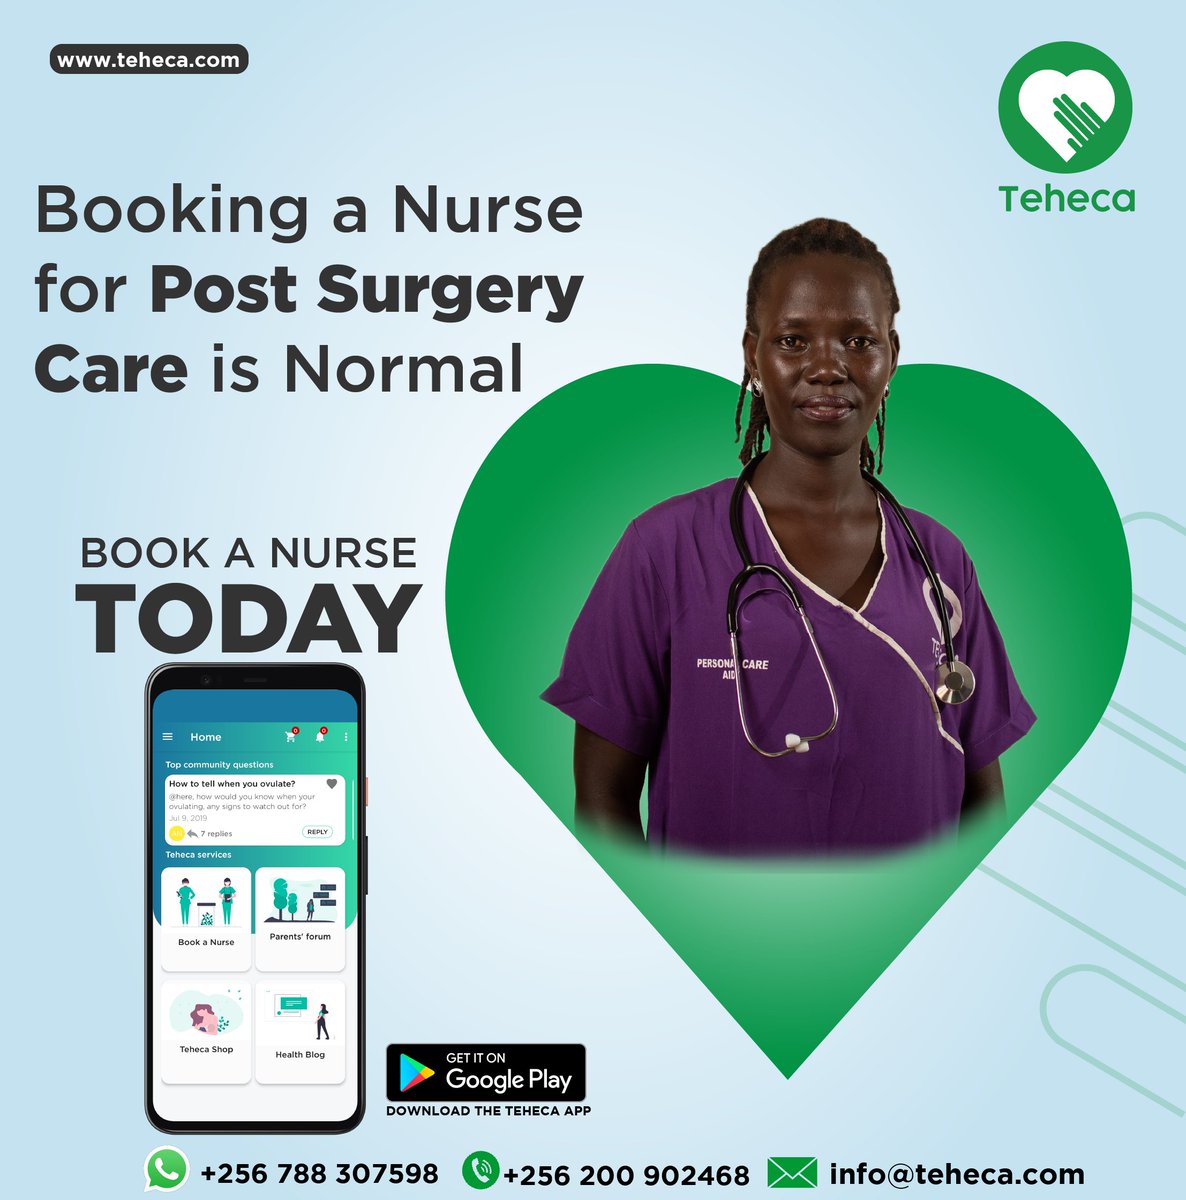 Ugandans lets Normalize these things, #bookanursewithus  #tehecacares 
bit.ly/book-a-nurse